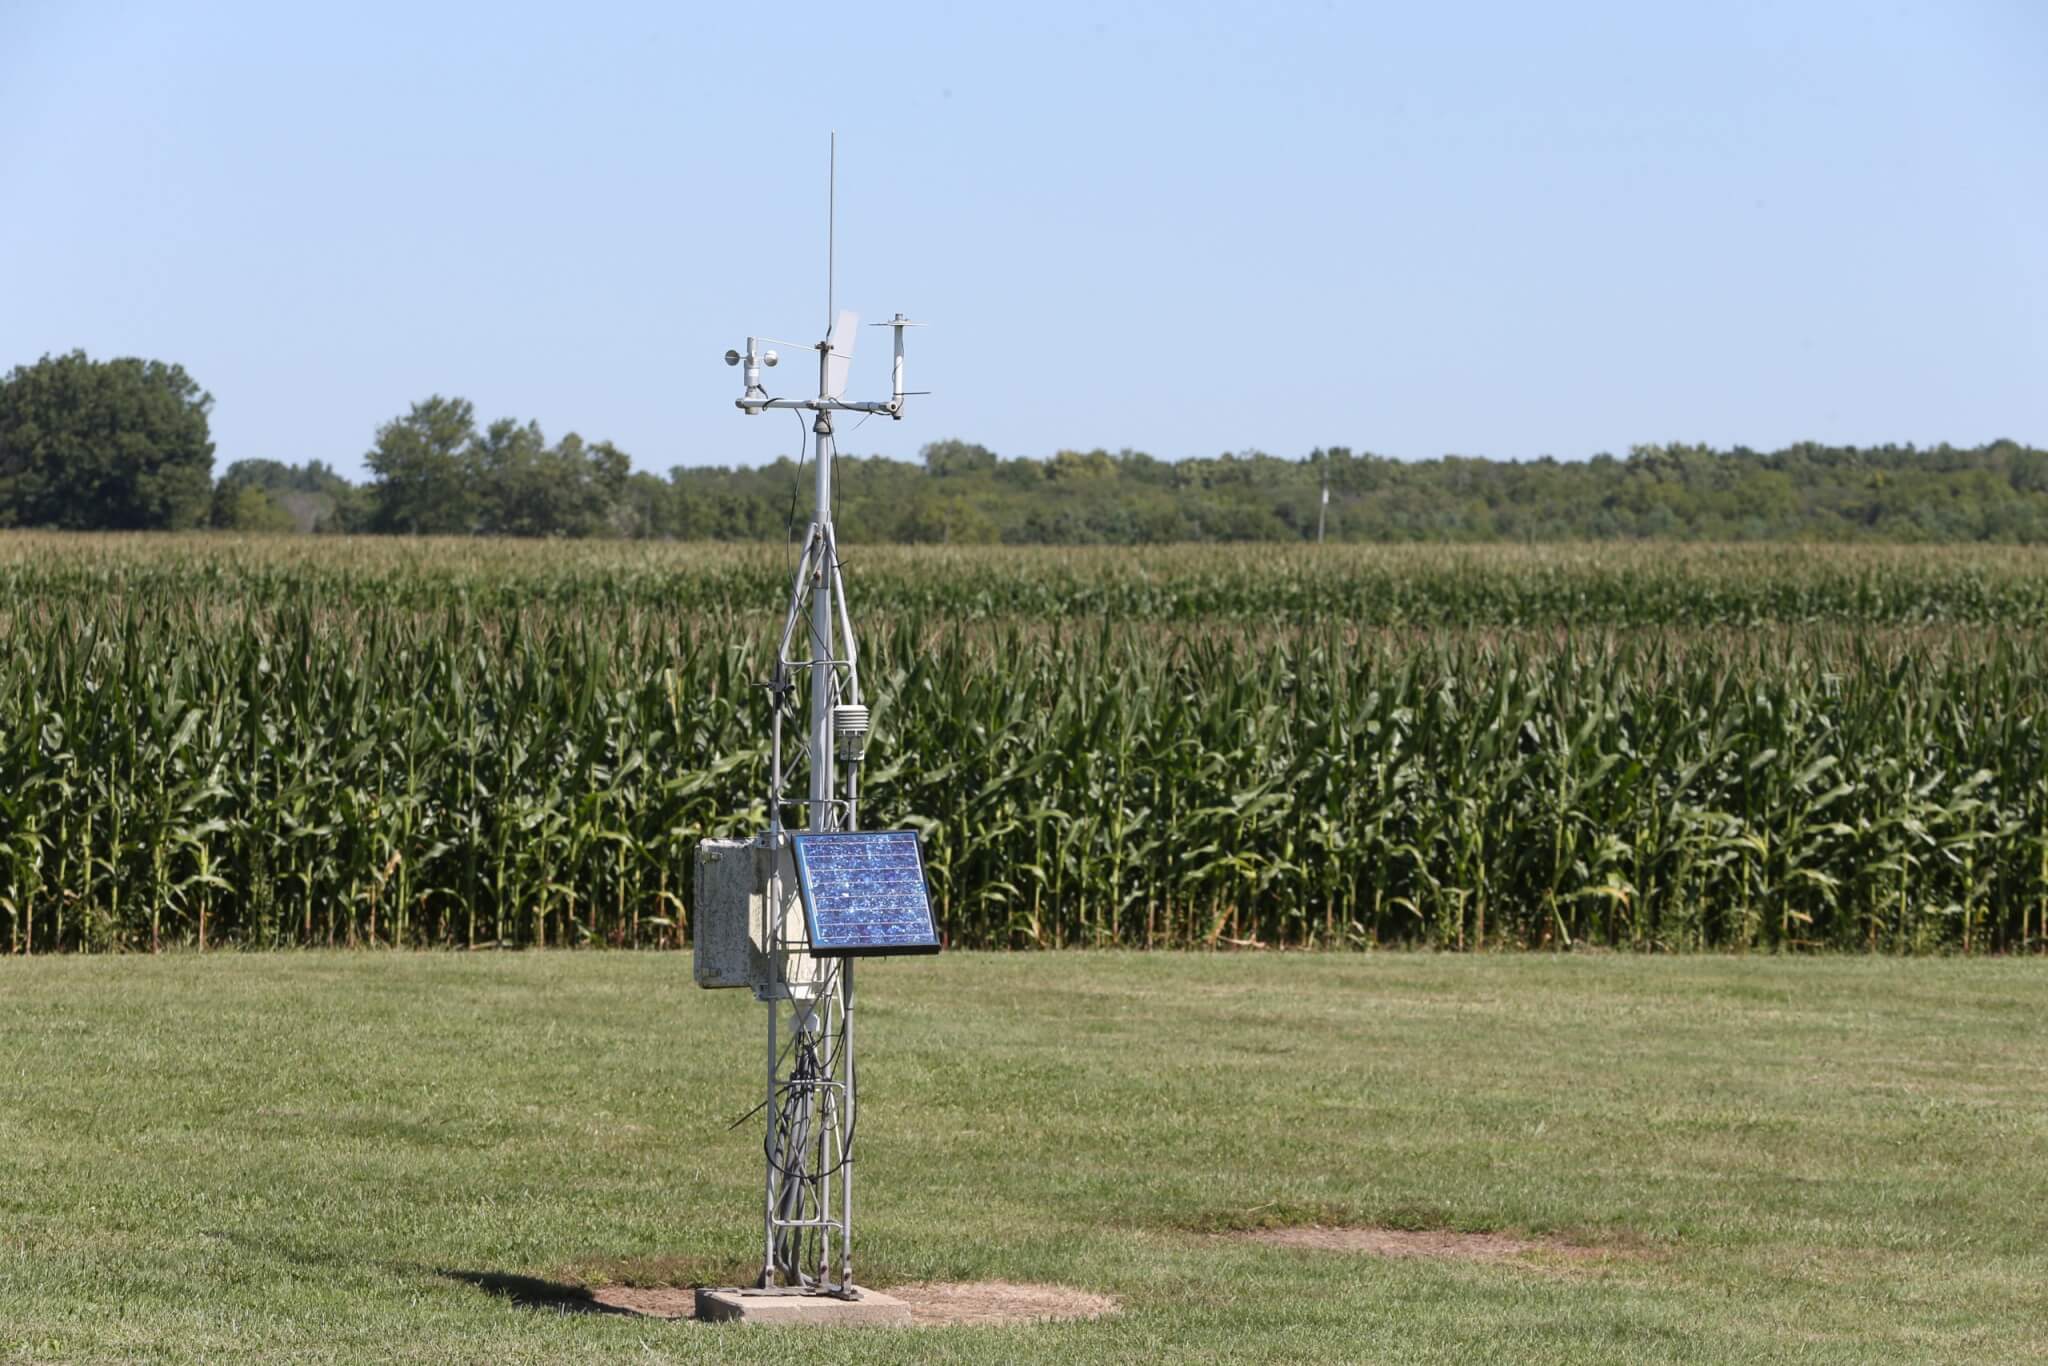 Weather station at the Davis Purdue Agricultural Center. Photo by Tom Campbell.